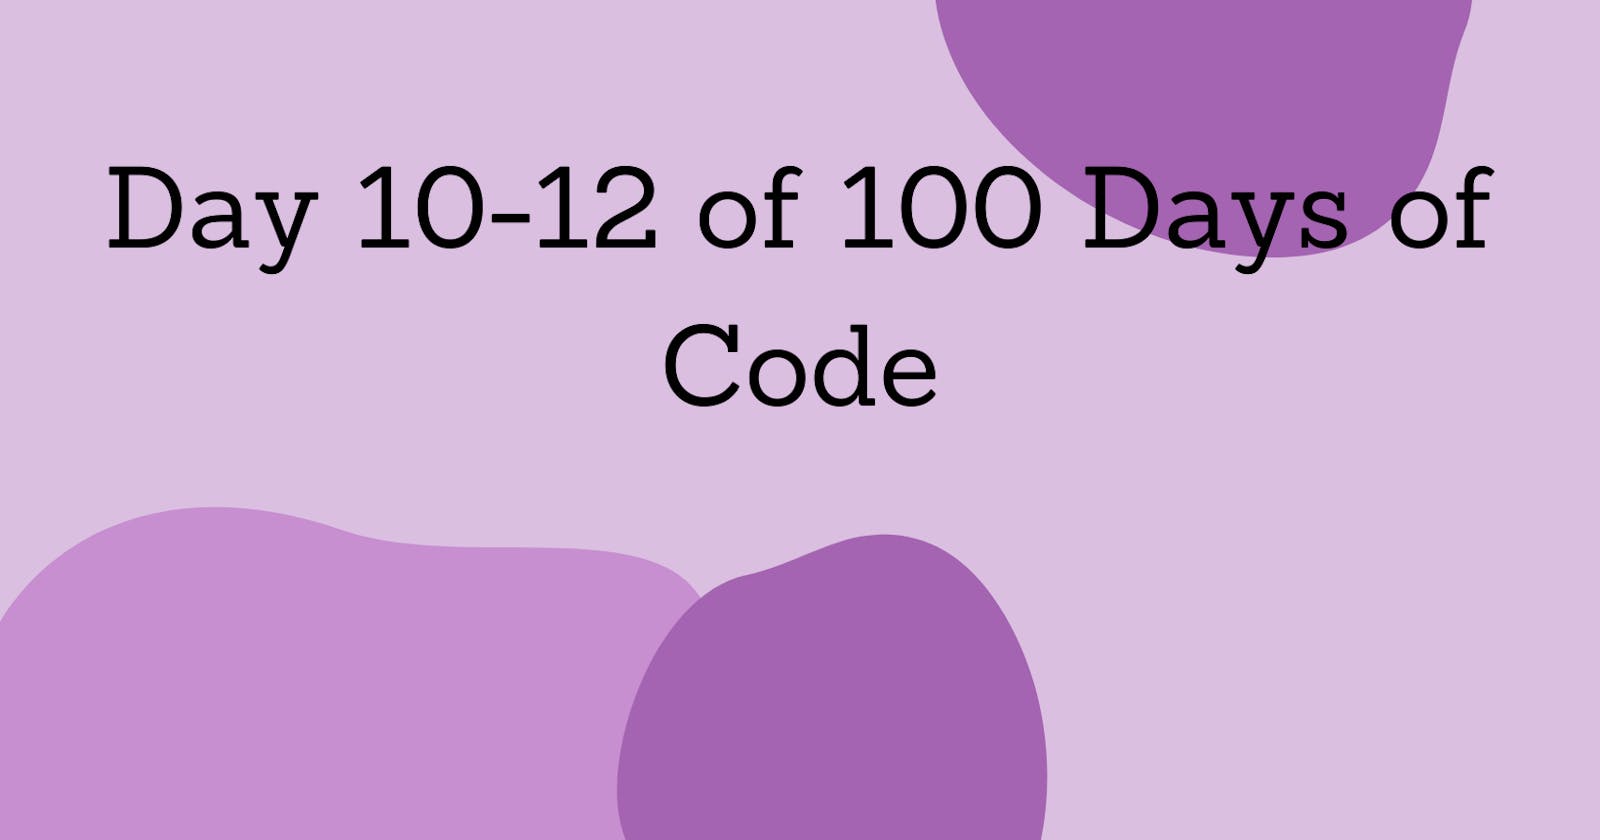 Day 10-12 Days of Code